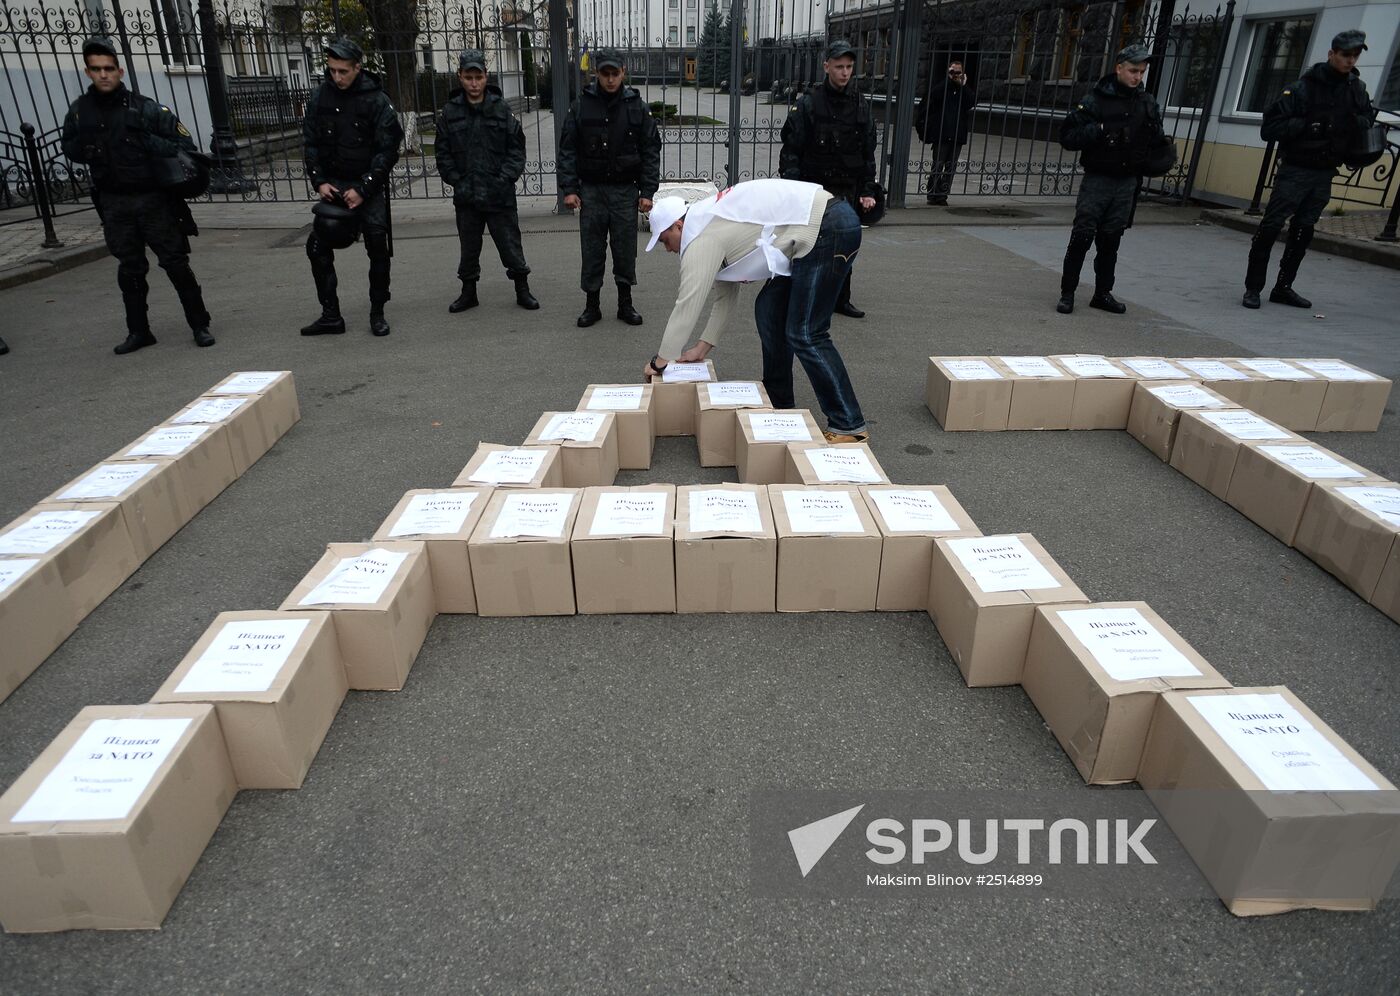 Batkivshchyna Party presents 3 million signatures in support of referendum on Ukraine's accession to NATO